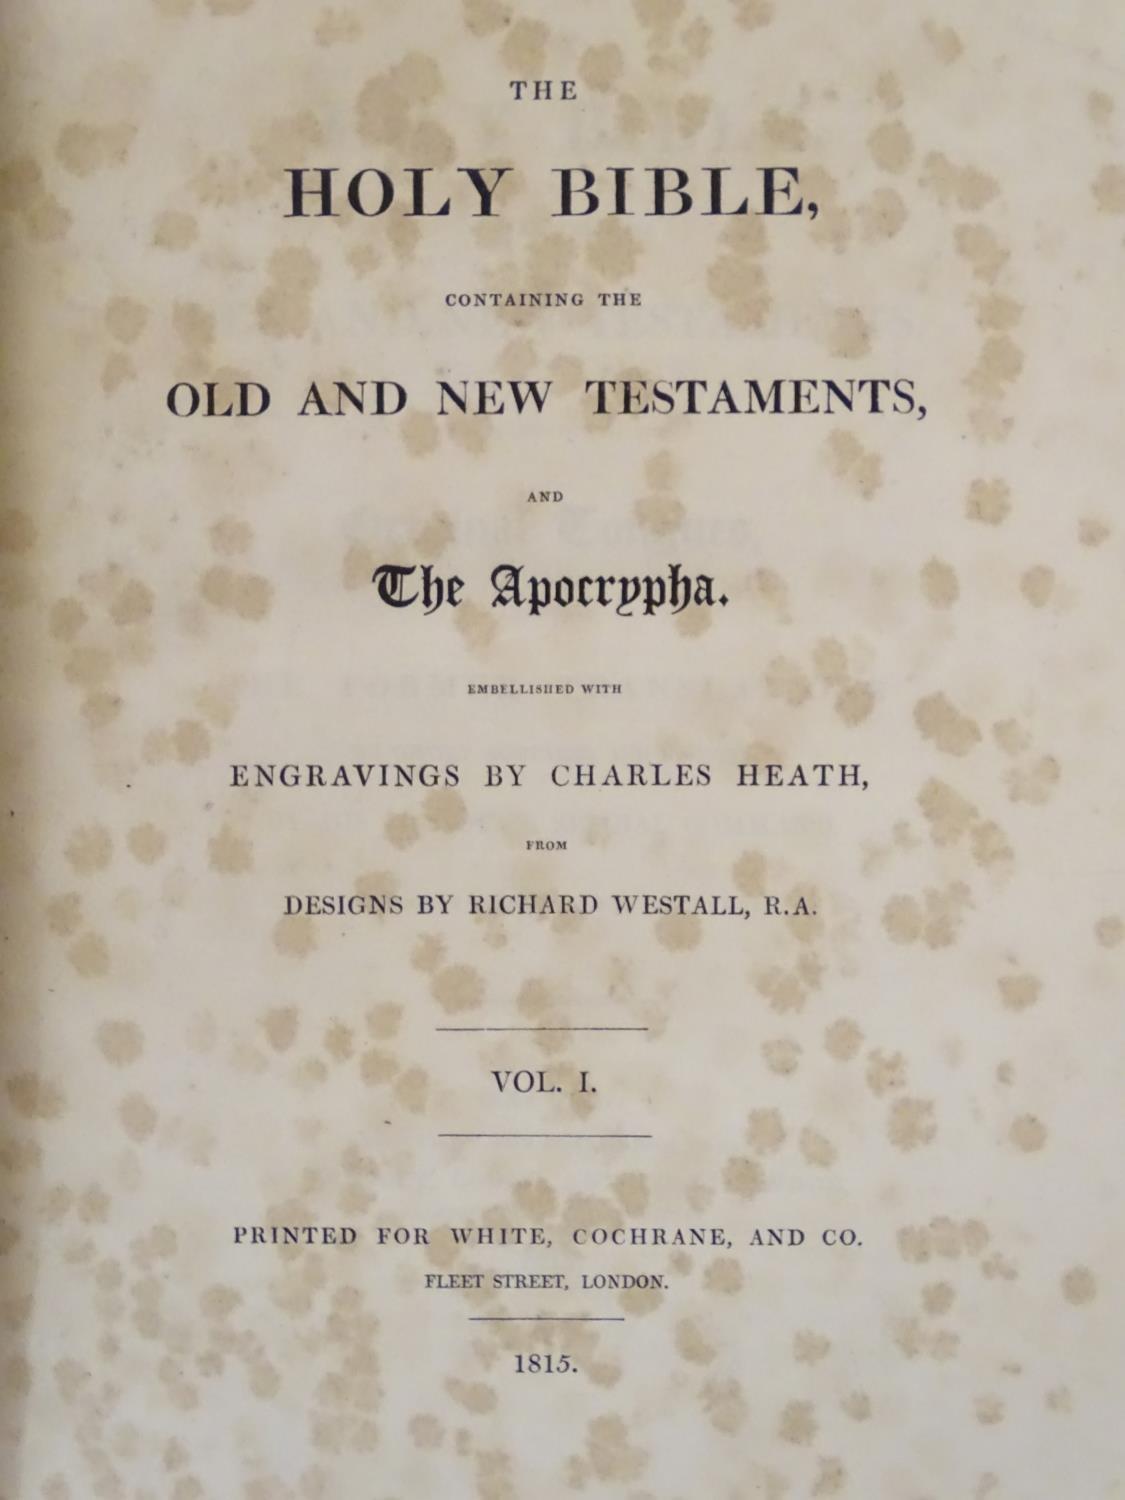 Book: The Holy Bible, illustrated by Charles Heath / Richard Westall, pub. White Cochrane and Co - Image 2 of 10